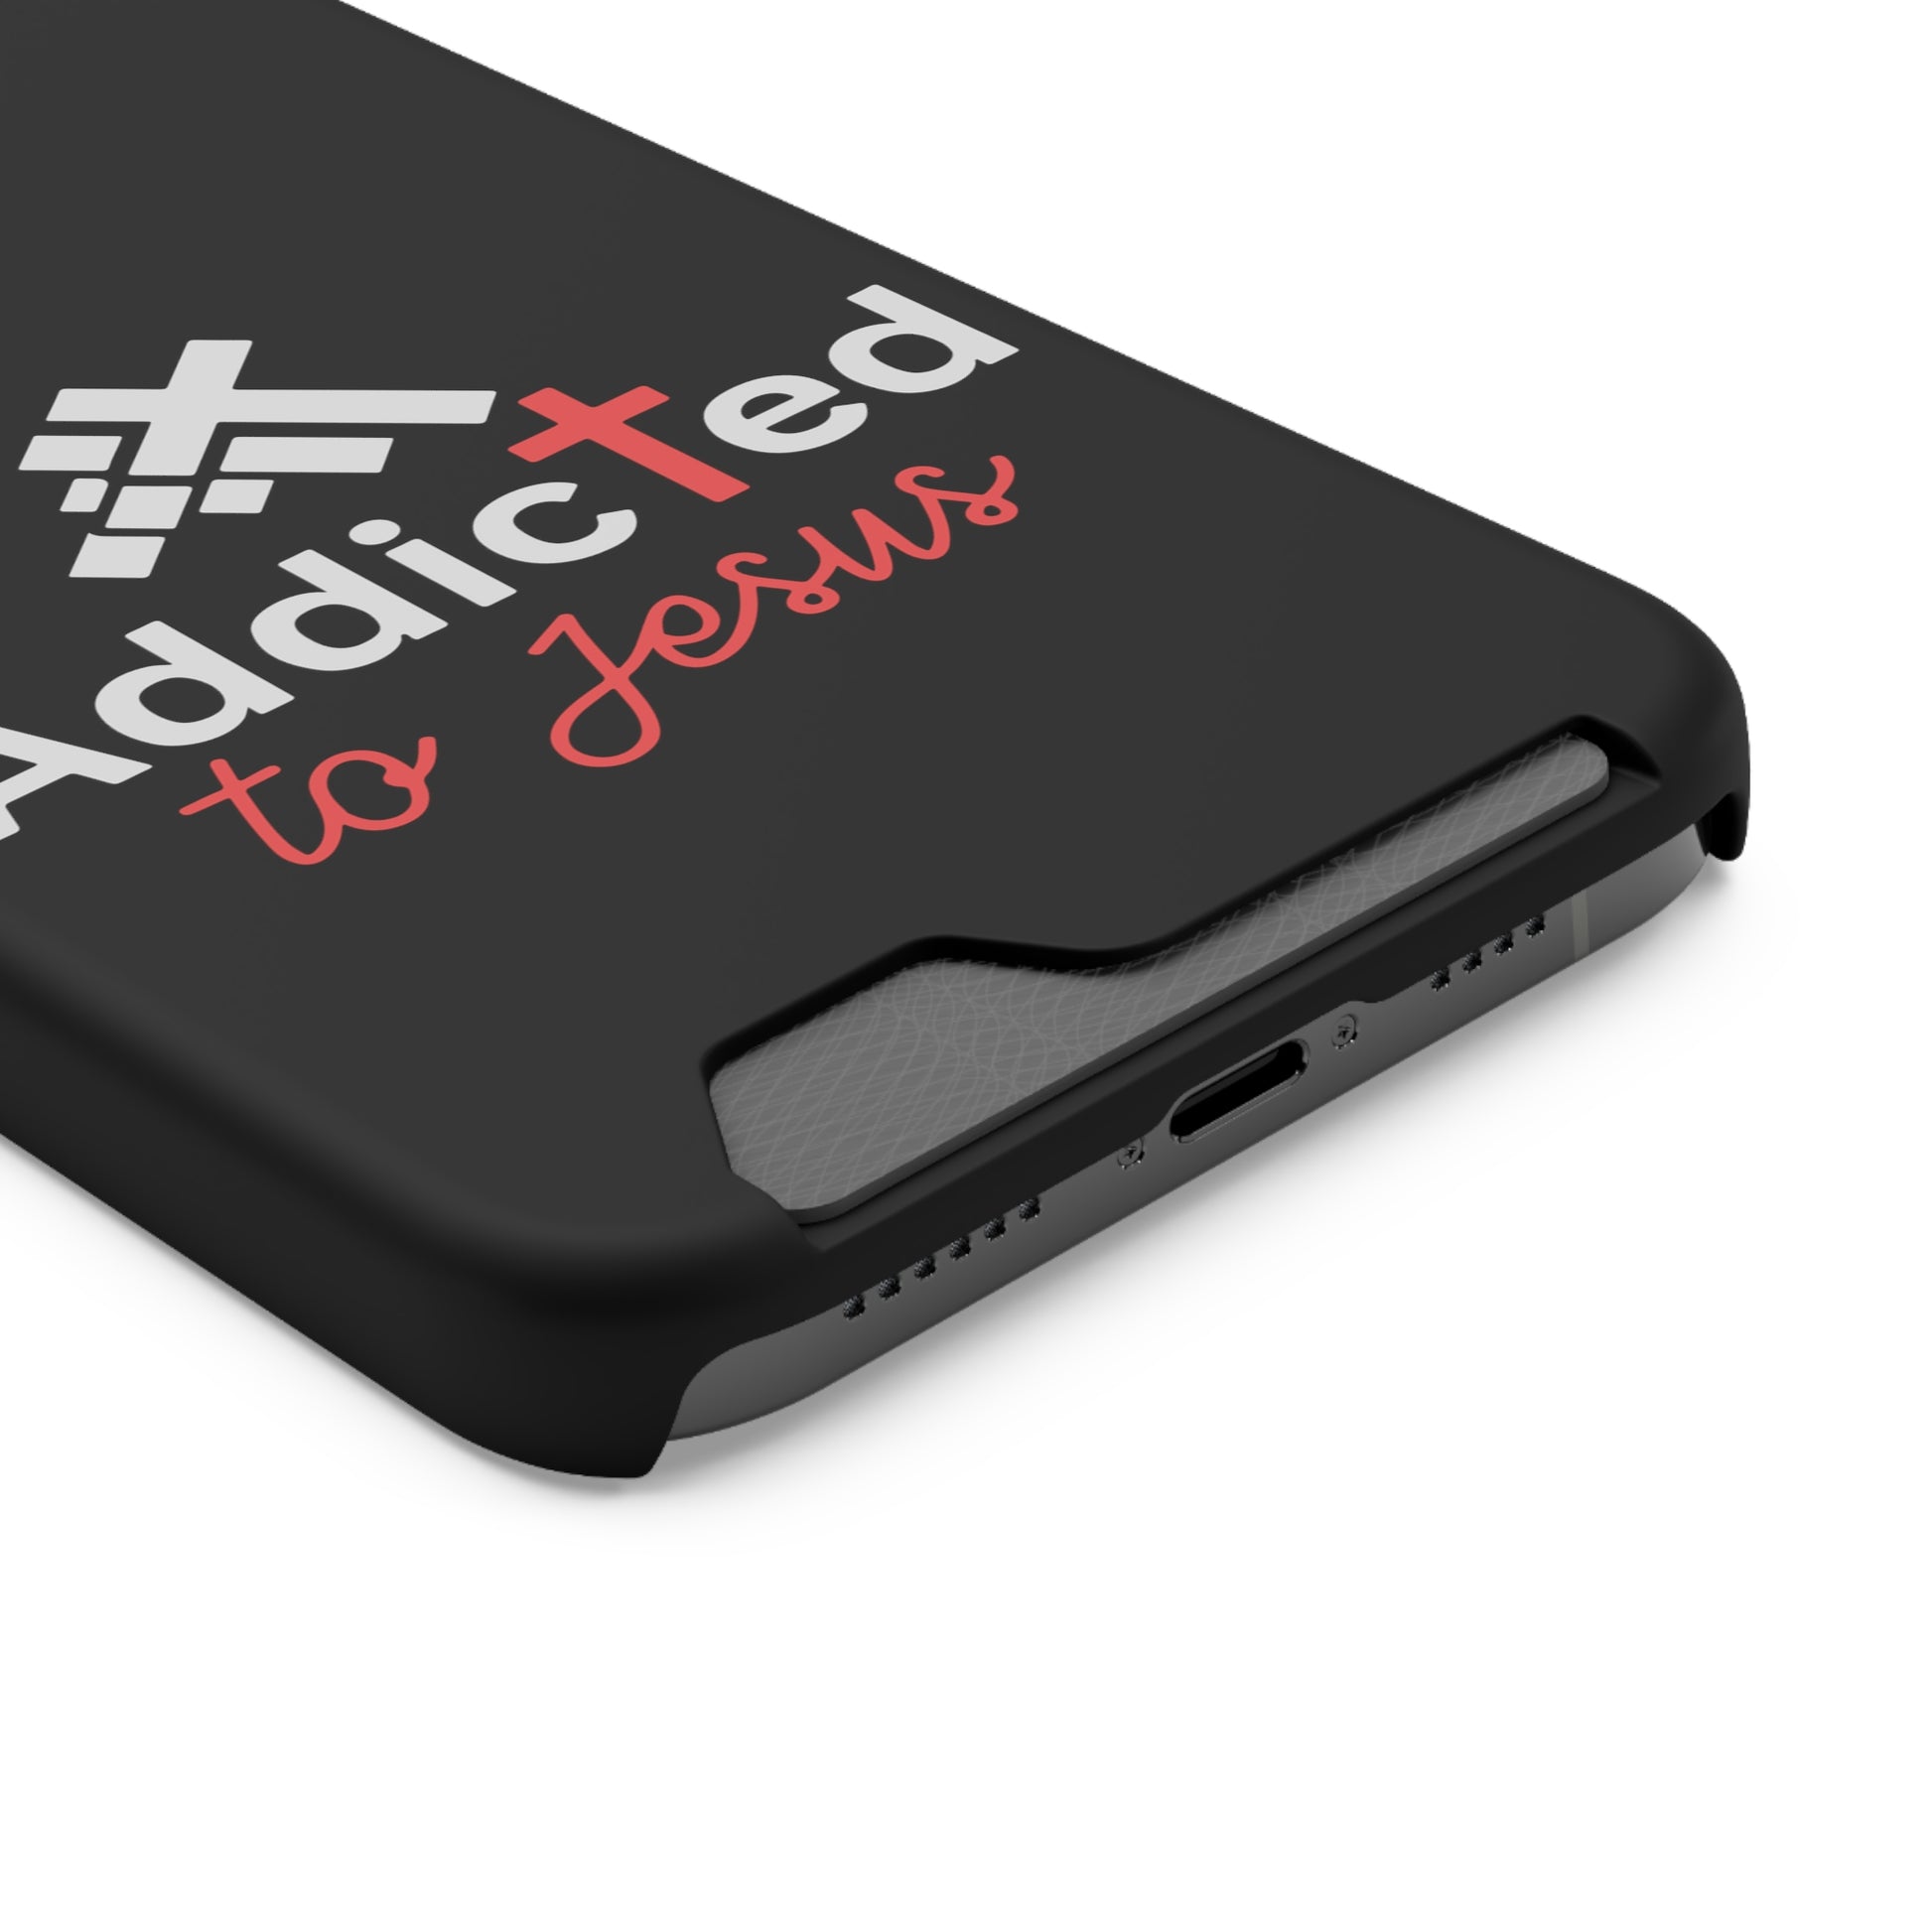 Addicted To Jesus Christian Phone Case With Card Holder Printify